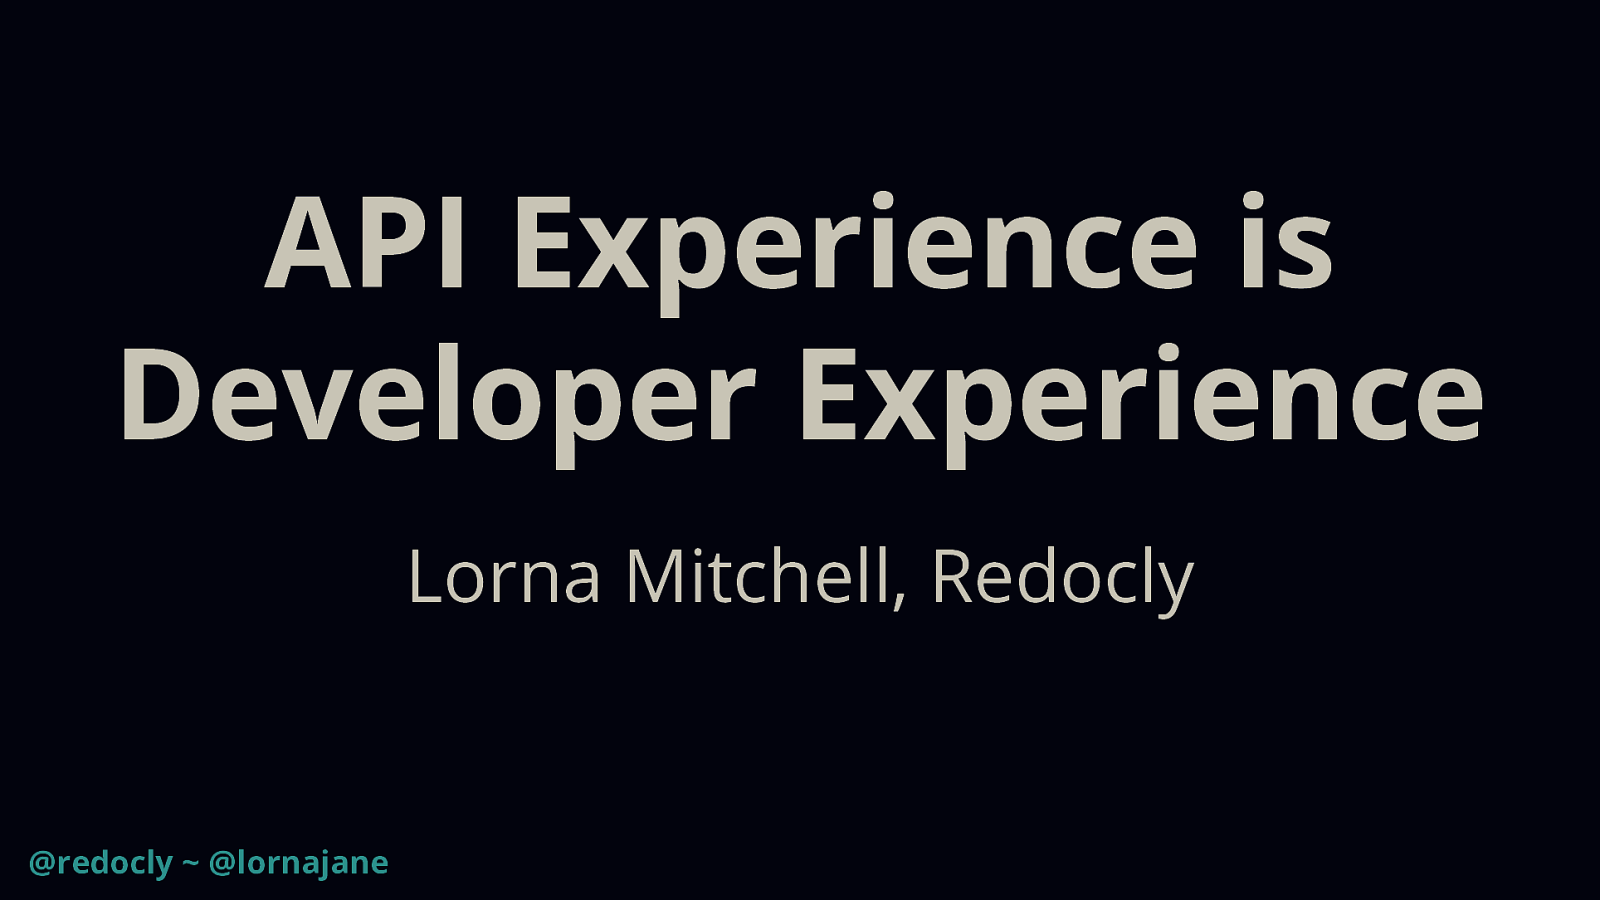 API Experience is Developer Experience